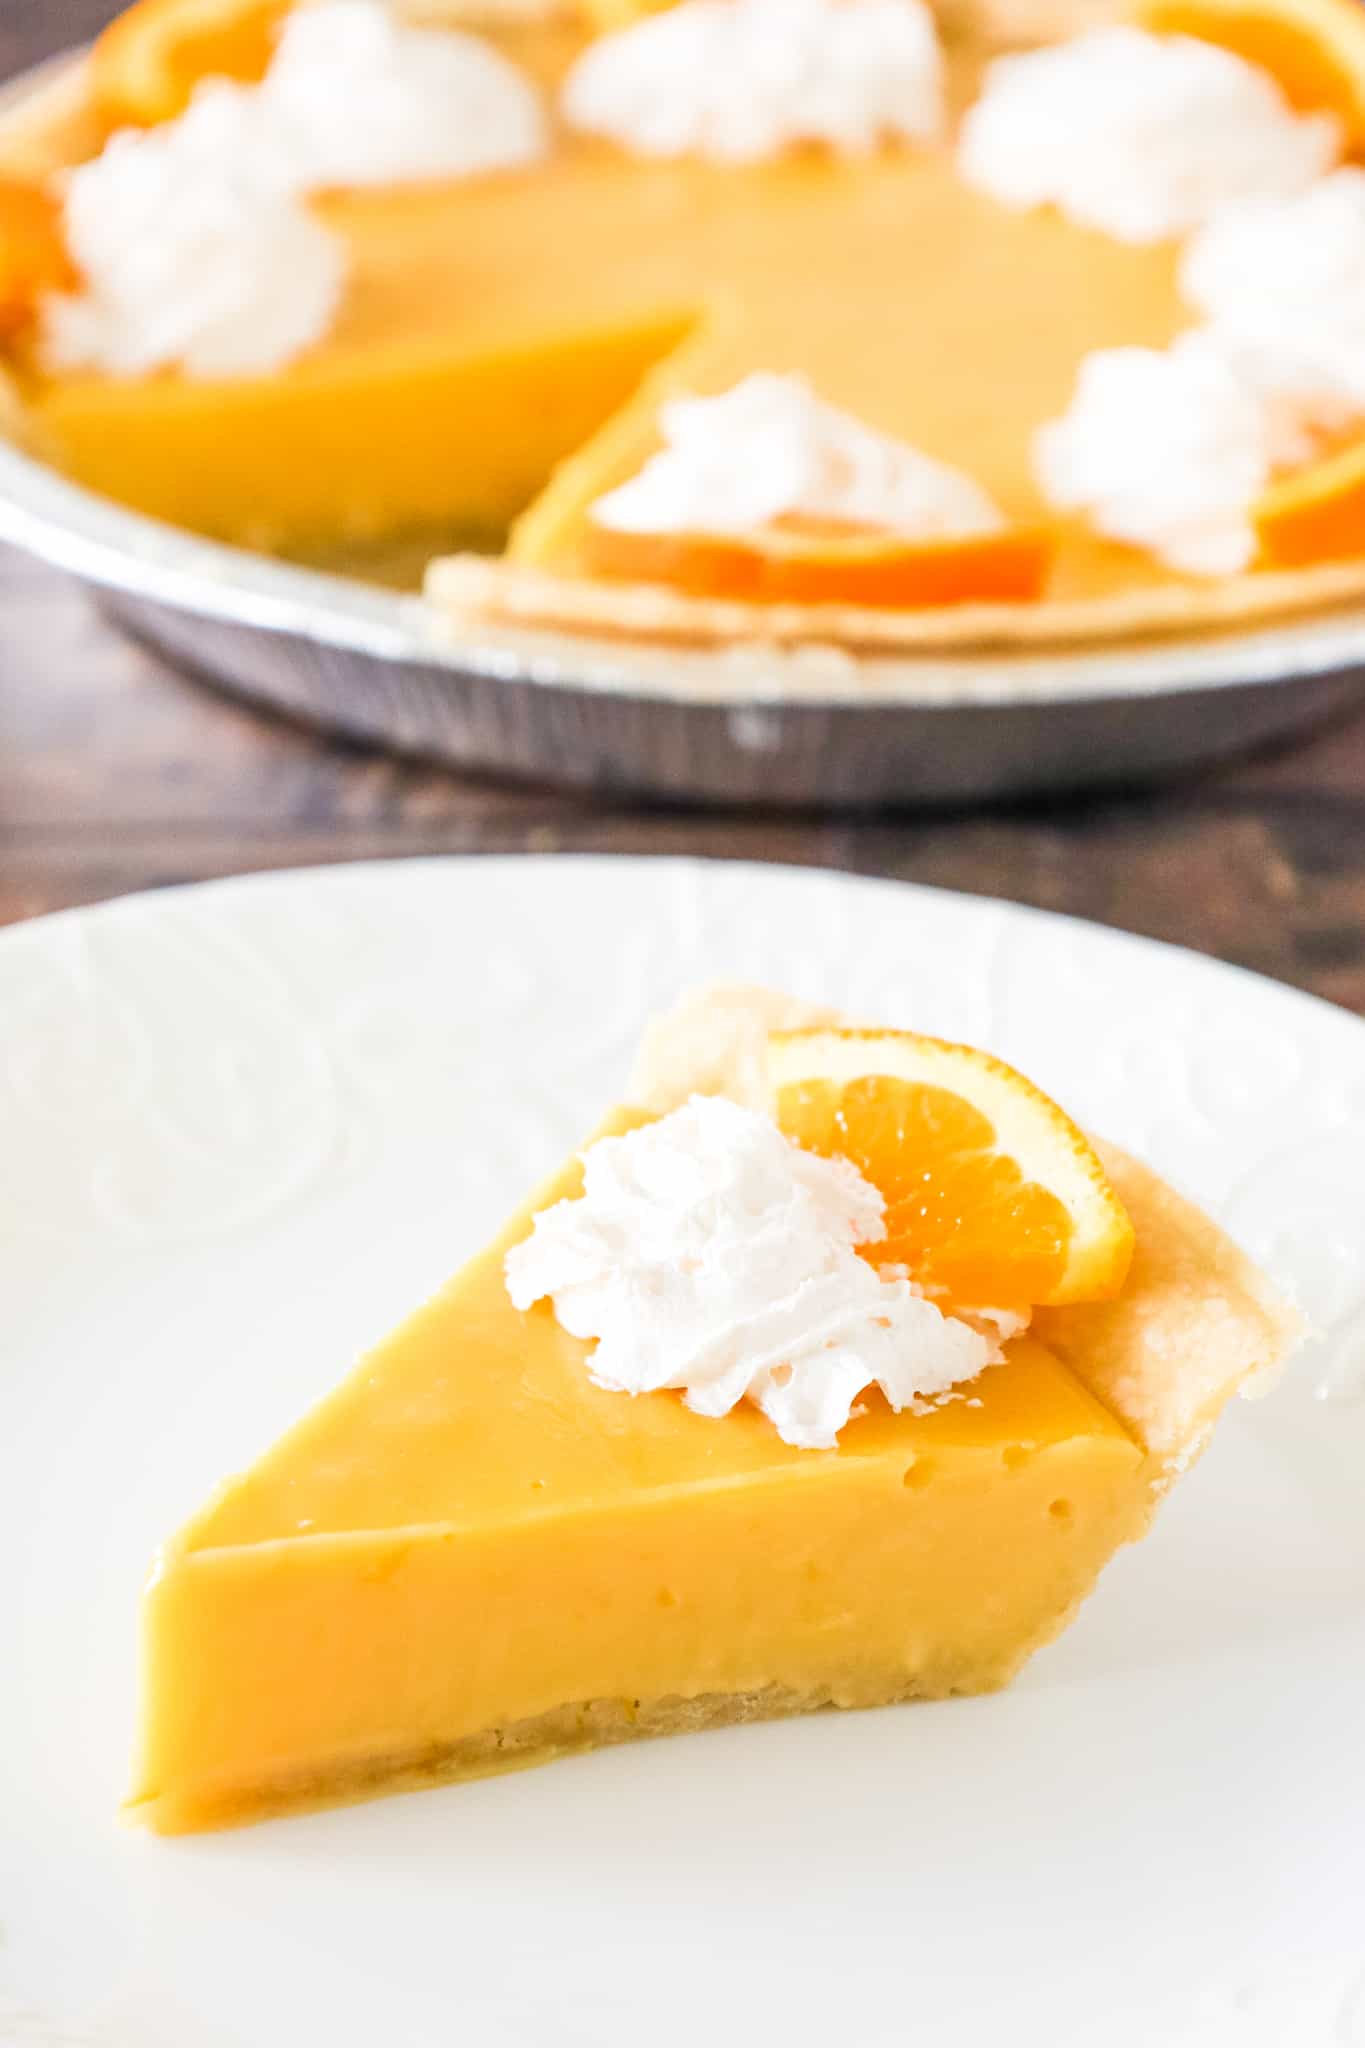 Orange Pie is a sweet and tart pie made with a store bought pie crust and a creamy homemade orange filling.